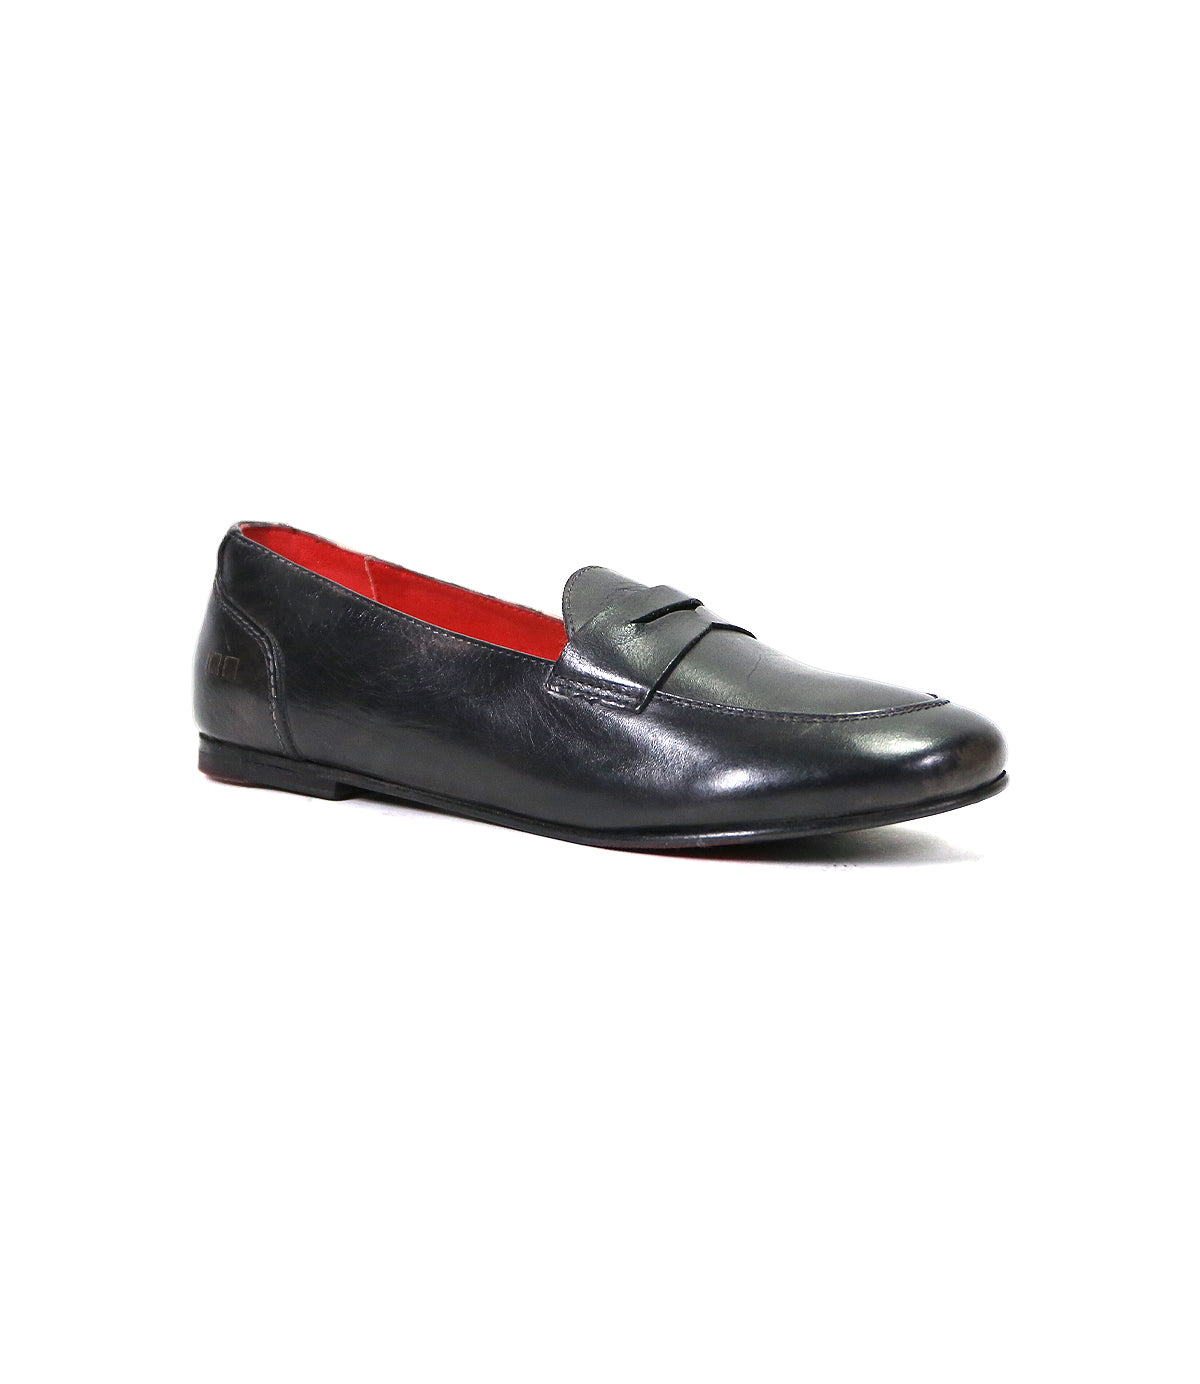 A single black leather Bed Stu penny loafer with a red interior and a decorative strap across the top, displayed against a white background.